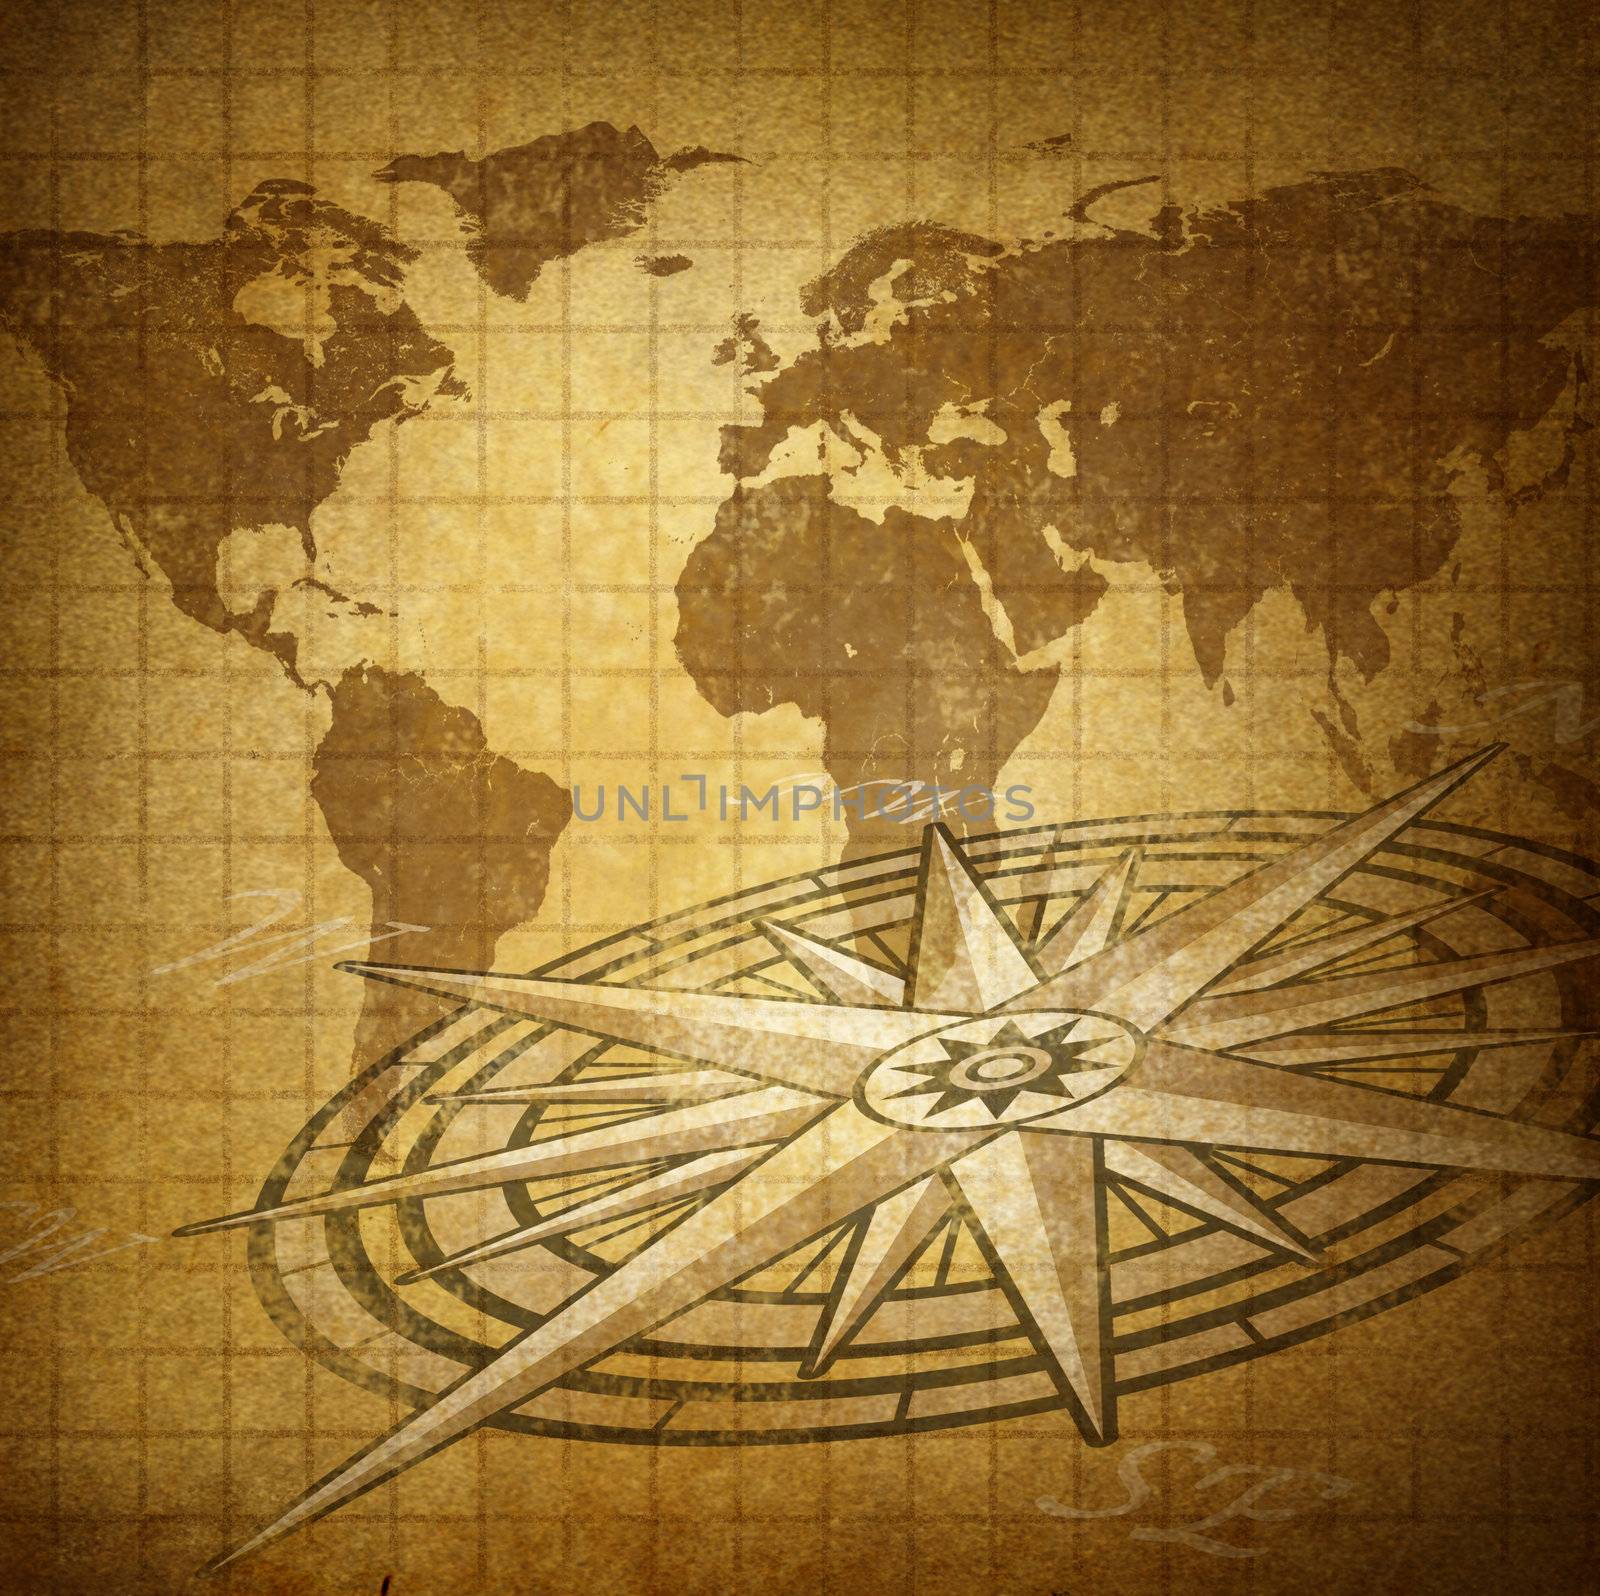 Global direction and world trade business with a rustic grunge map of the earth and a compass as an international symbol of making financial investing decisions and deciding where to invest. or travel to